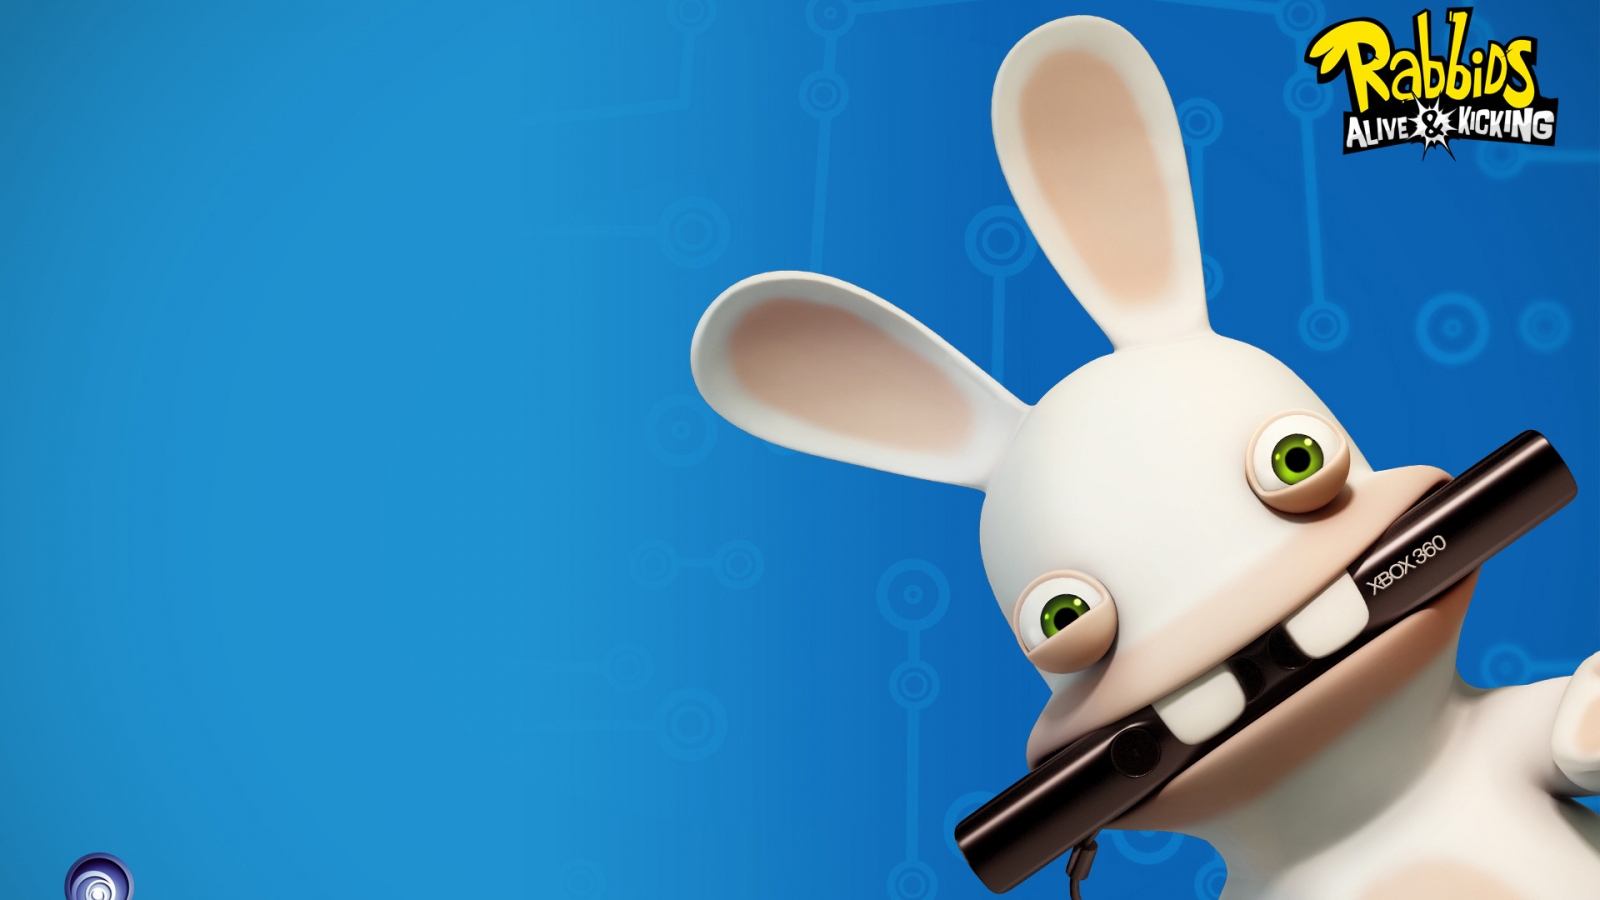 Rabbids Alive and Kicking for 1600 x 900 HDTV resolution